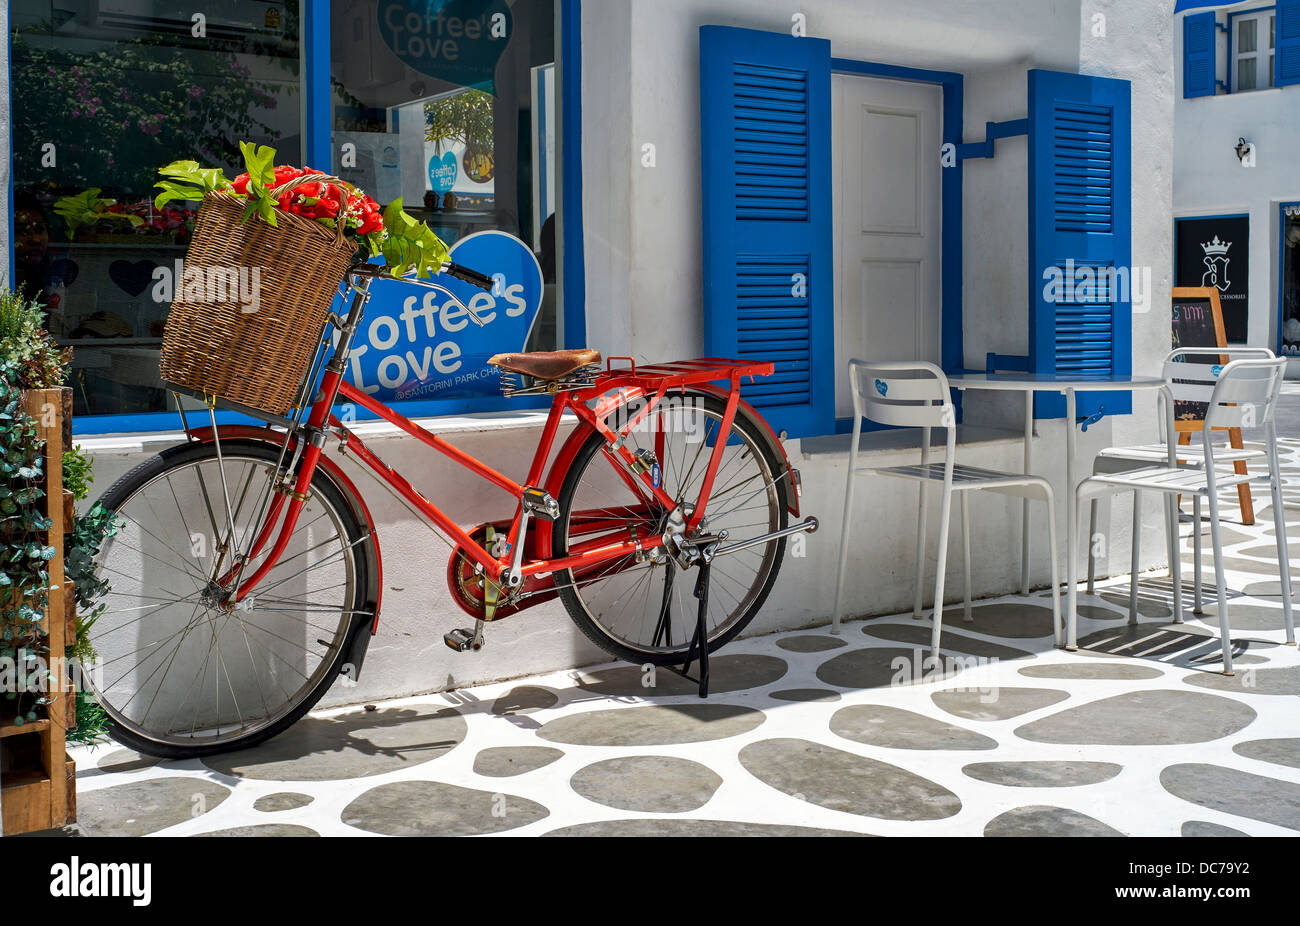 Red bicycle complete with a basket of flowers used as an advertising display for a local coffee shop. Thailand S. E. Asia Stock Photo